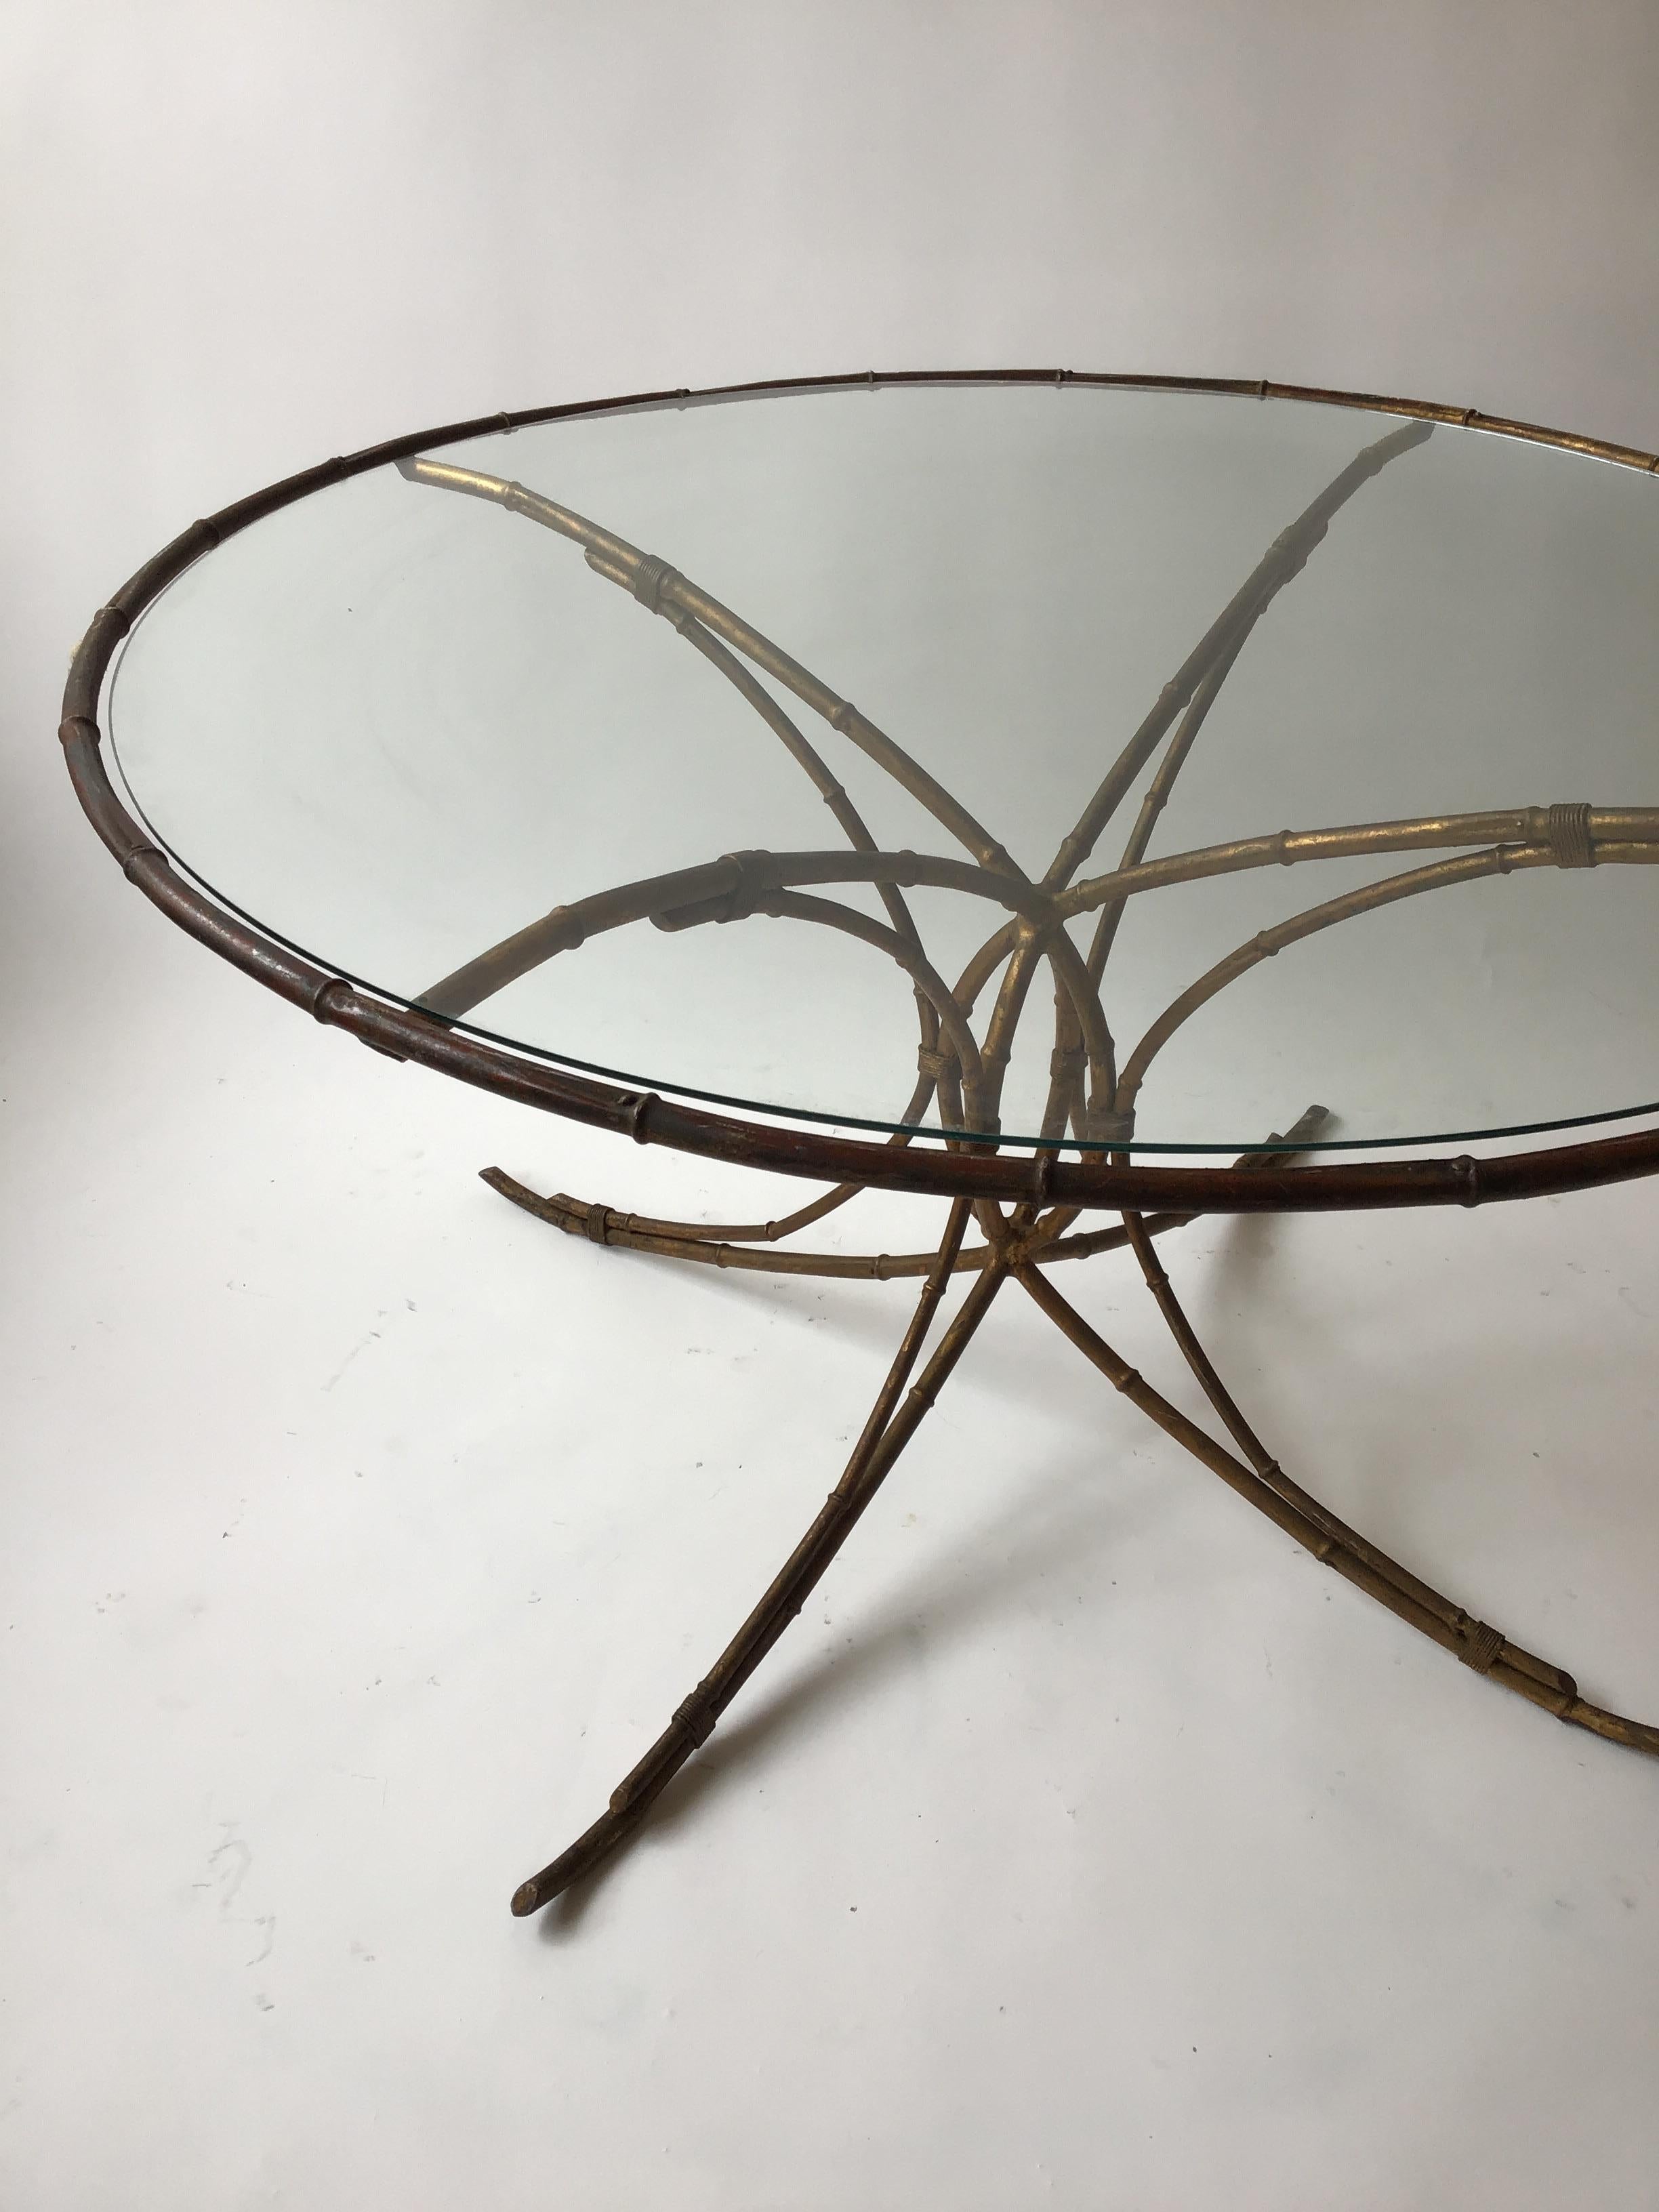 1950s Italian Gilt Metal Faux Bamboo Circular Dining Table In Good Condition For Sale In Tarrytown, NY